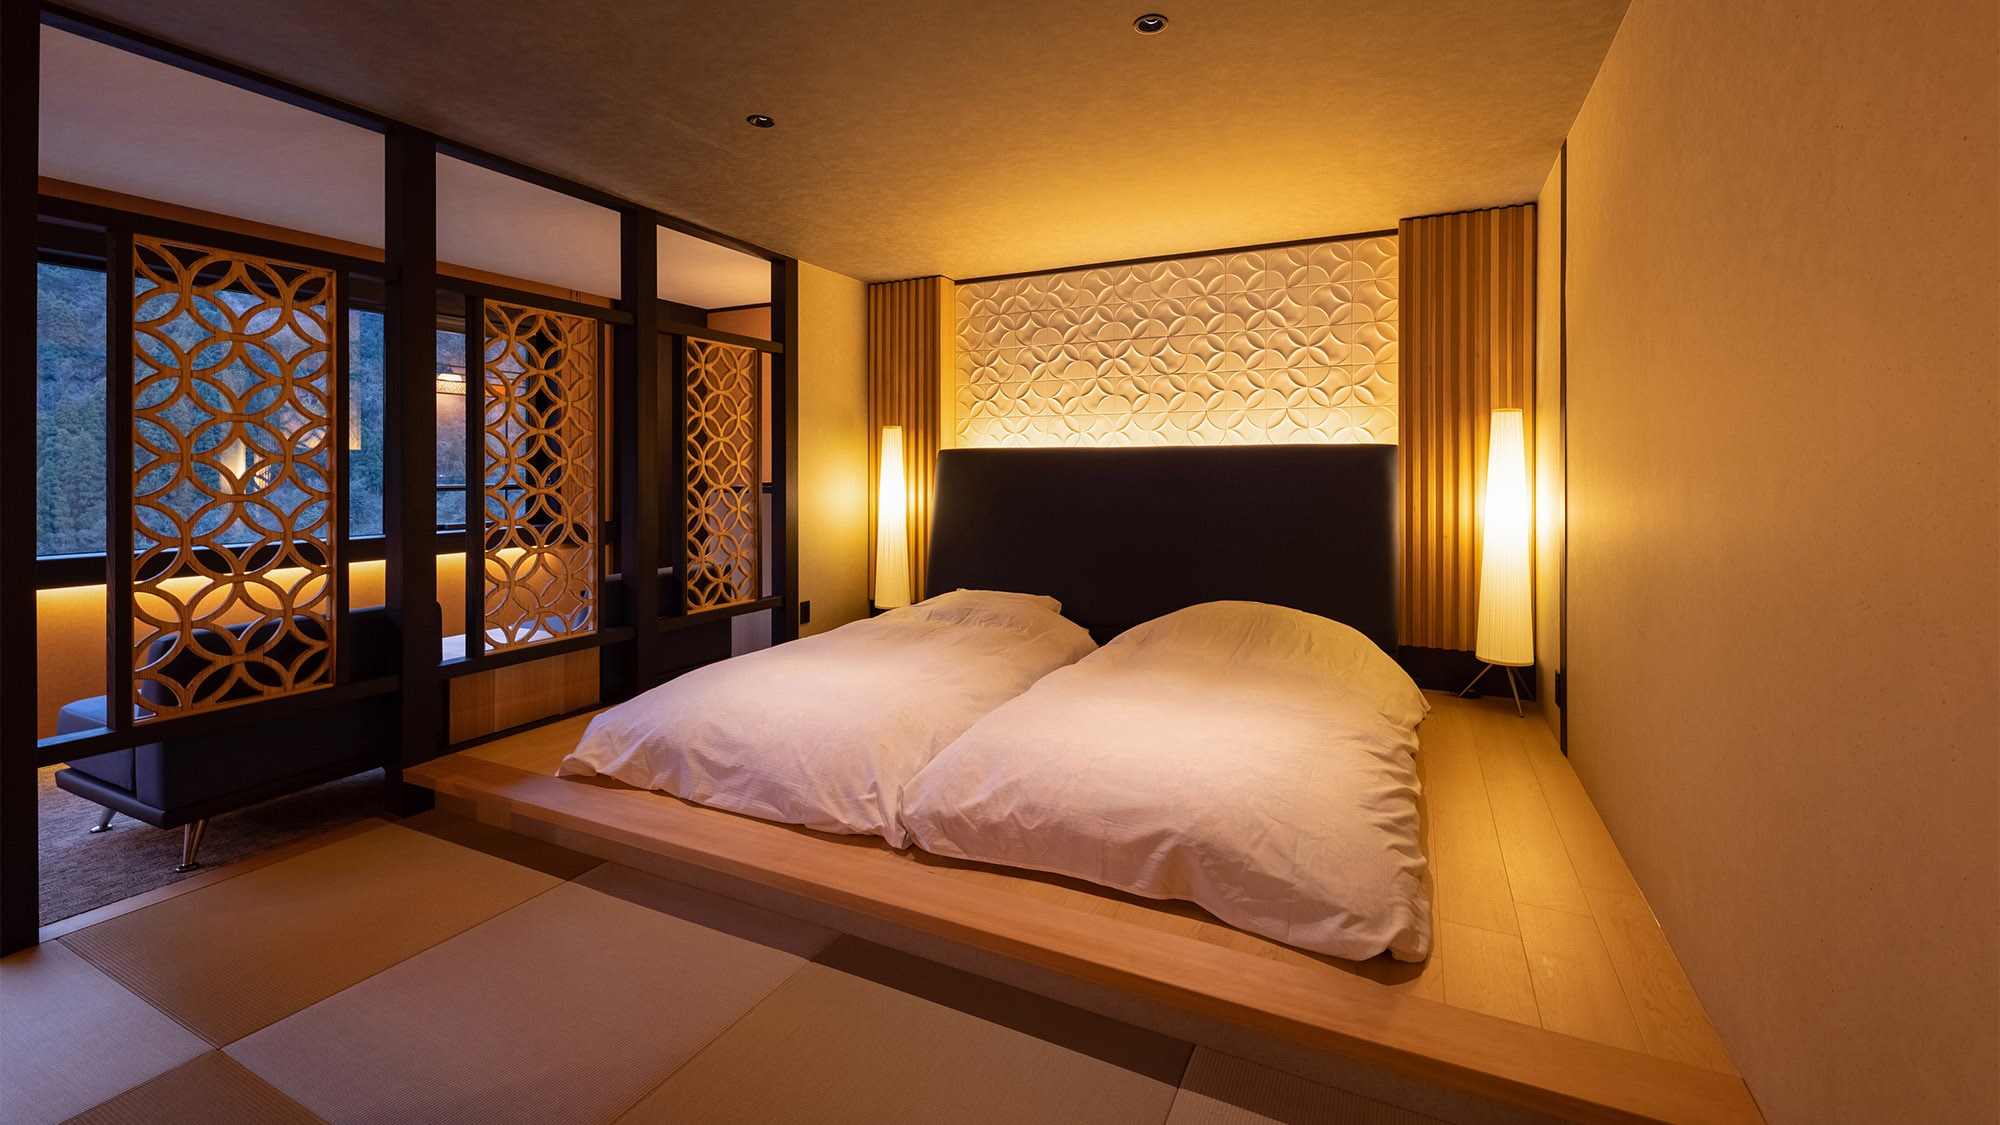 ・Two Japanese-Western style room 100 square meters